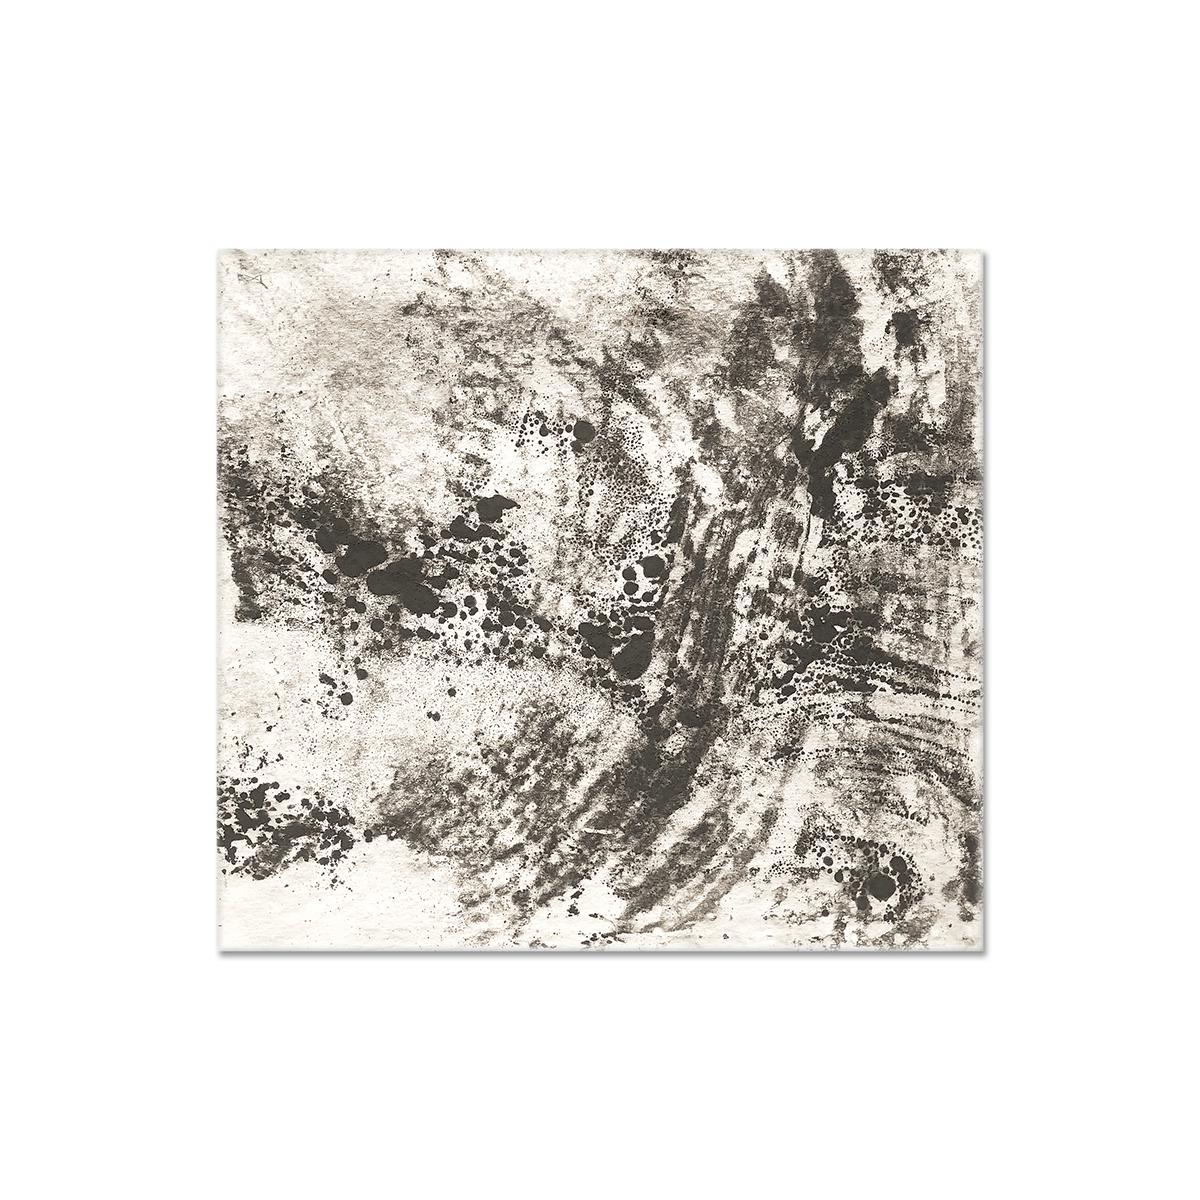 Kurtis Brand Abstract Painting - Ash Ceniza #12, (black and white, ashes, abstract expressionist, charcoal)